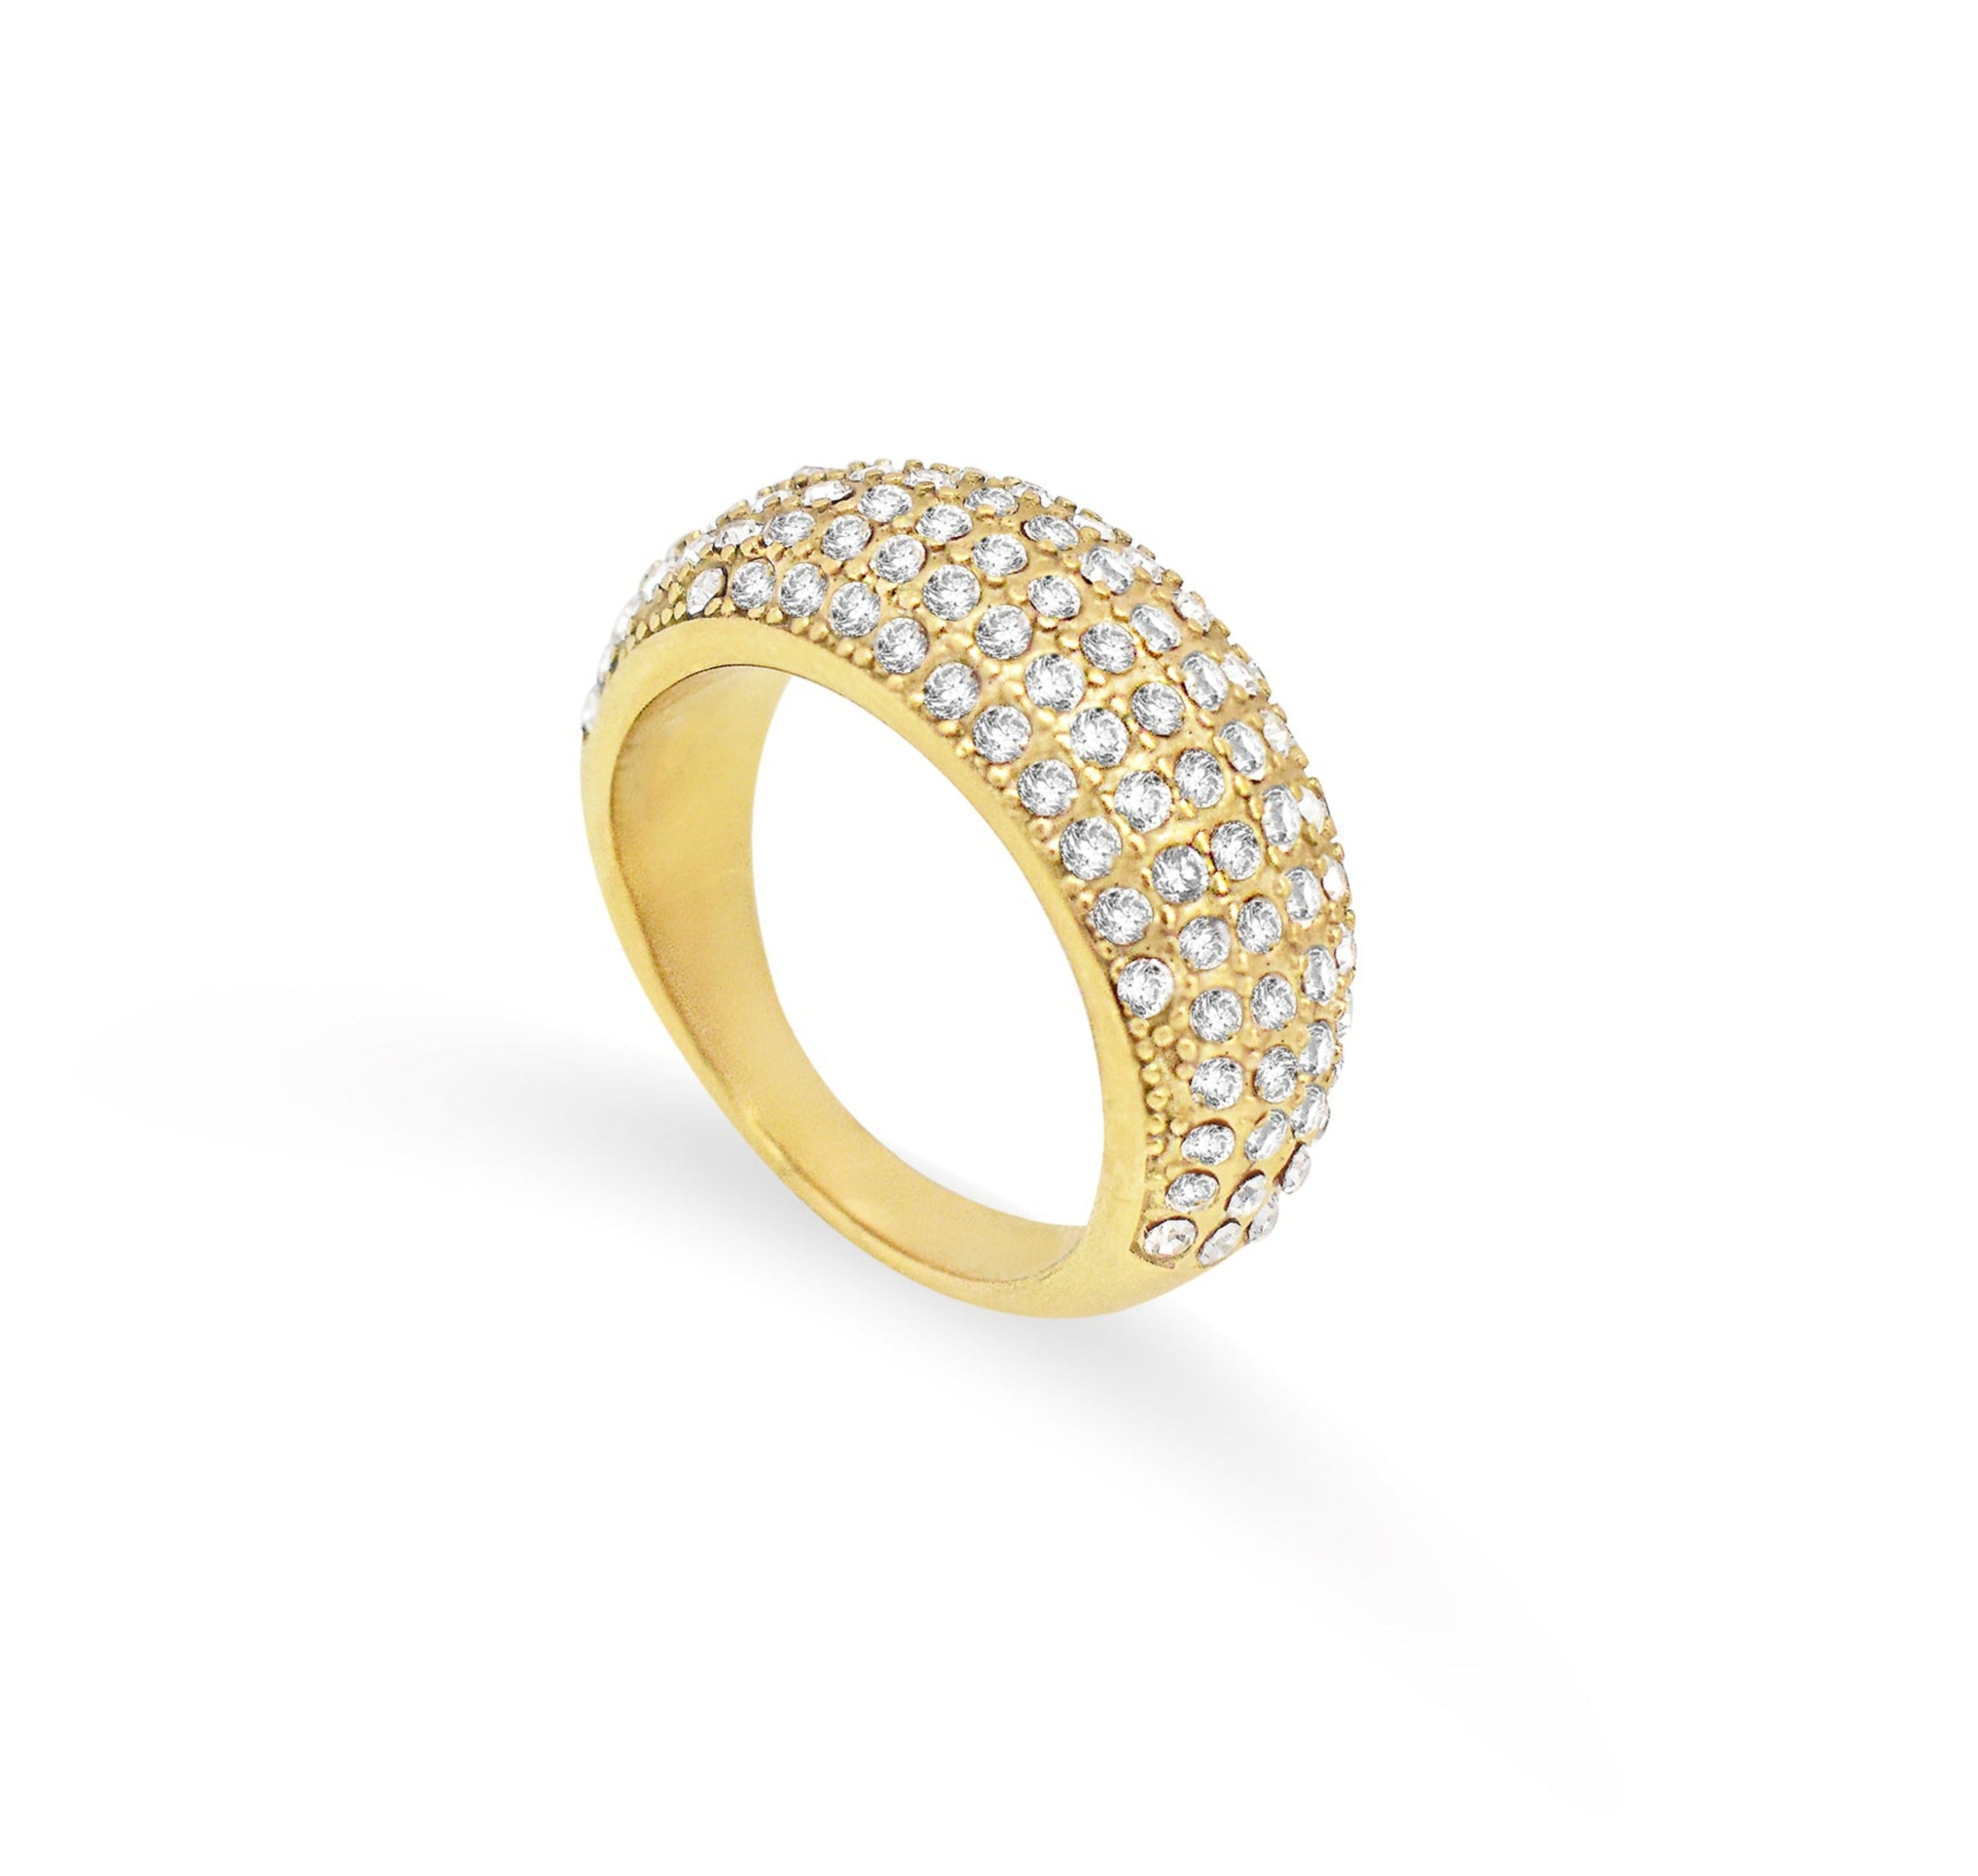 Nathalia gold pave dome ring waterproof jewelry